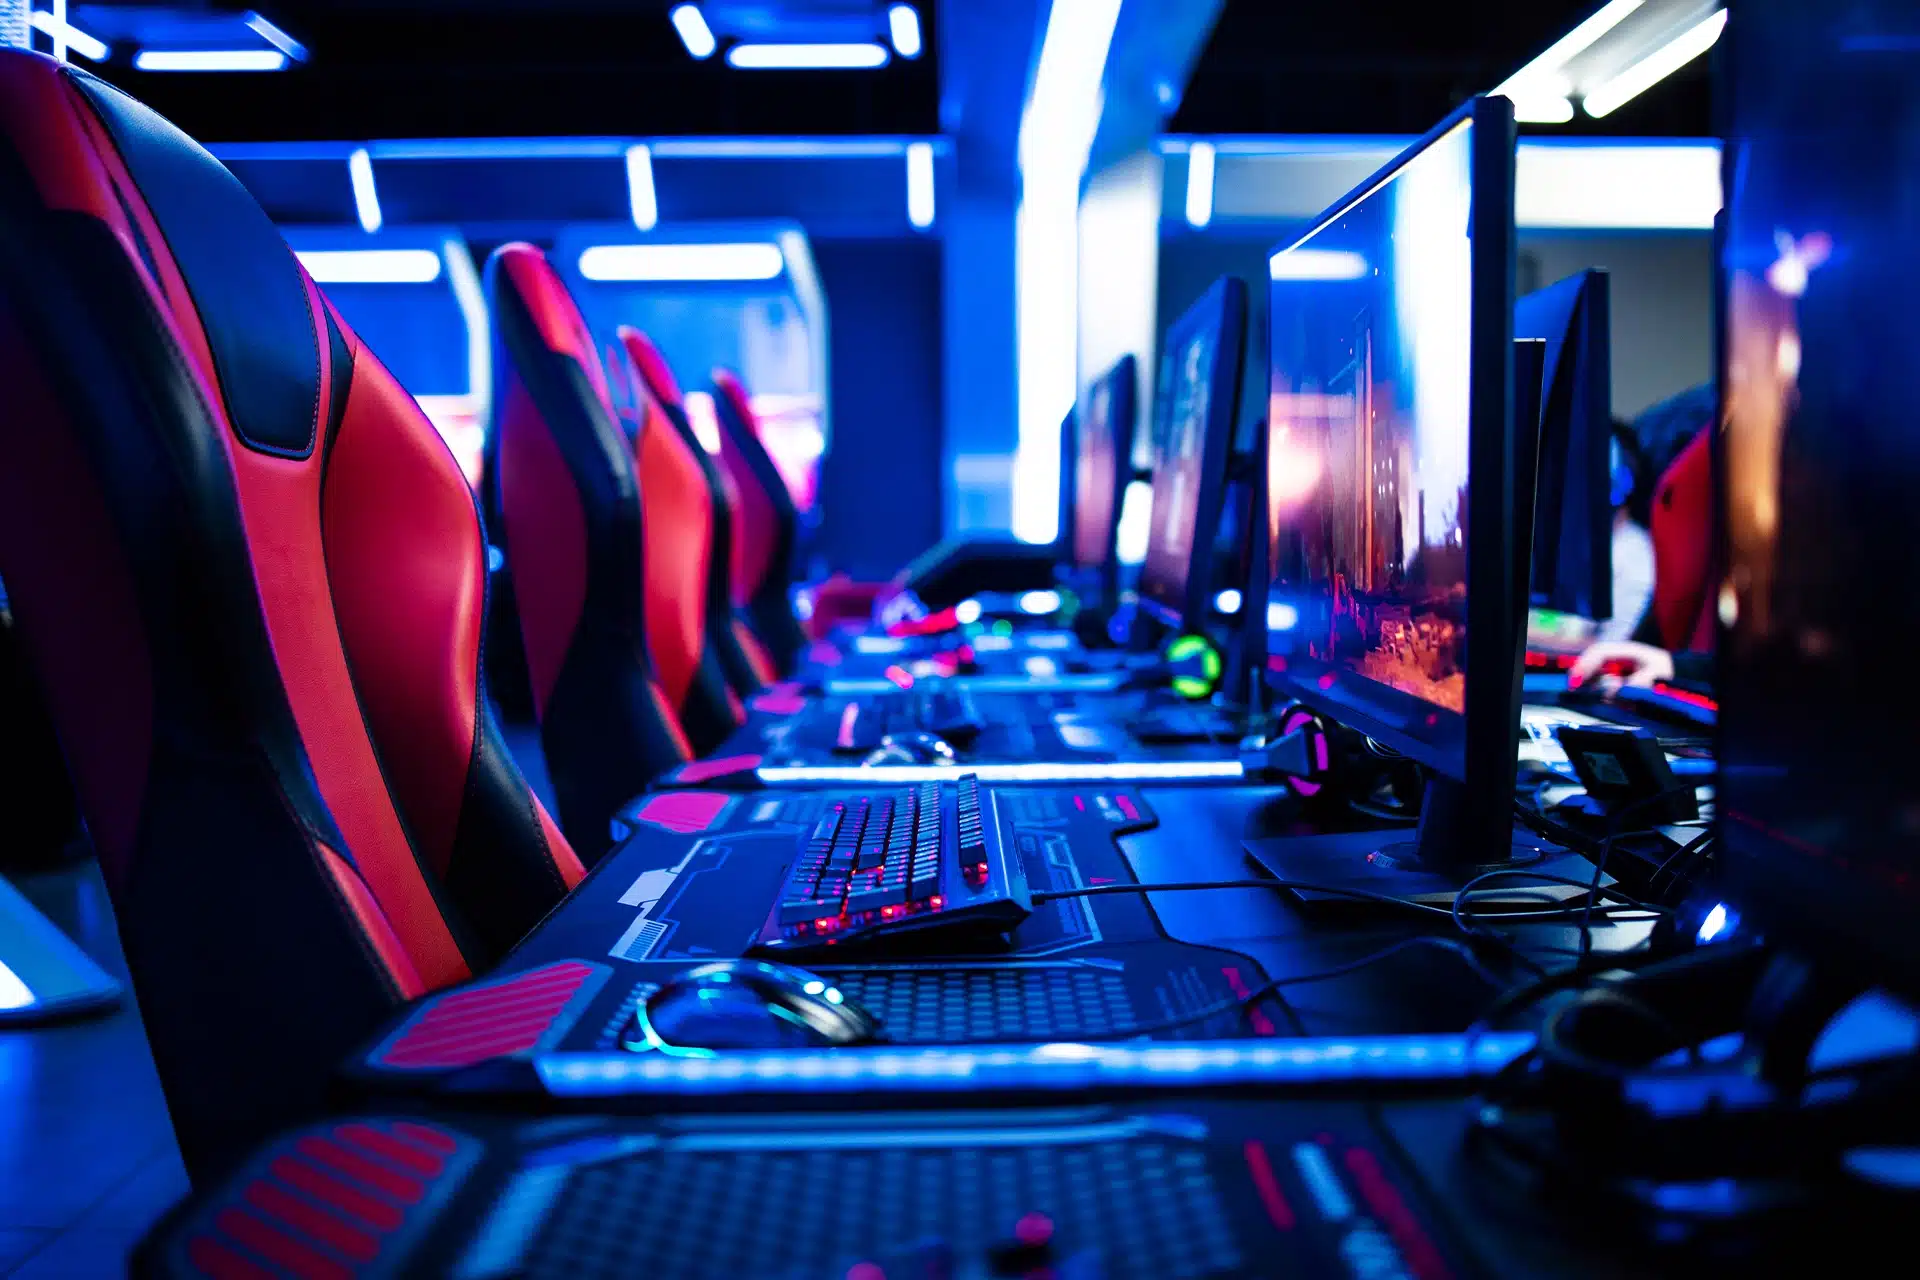 row of esports gaming chairs, keyboards, and computers